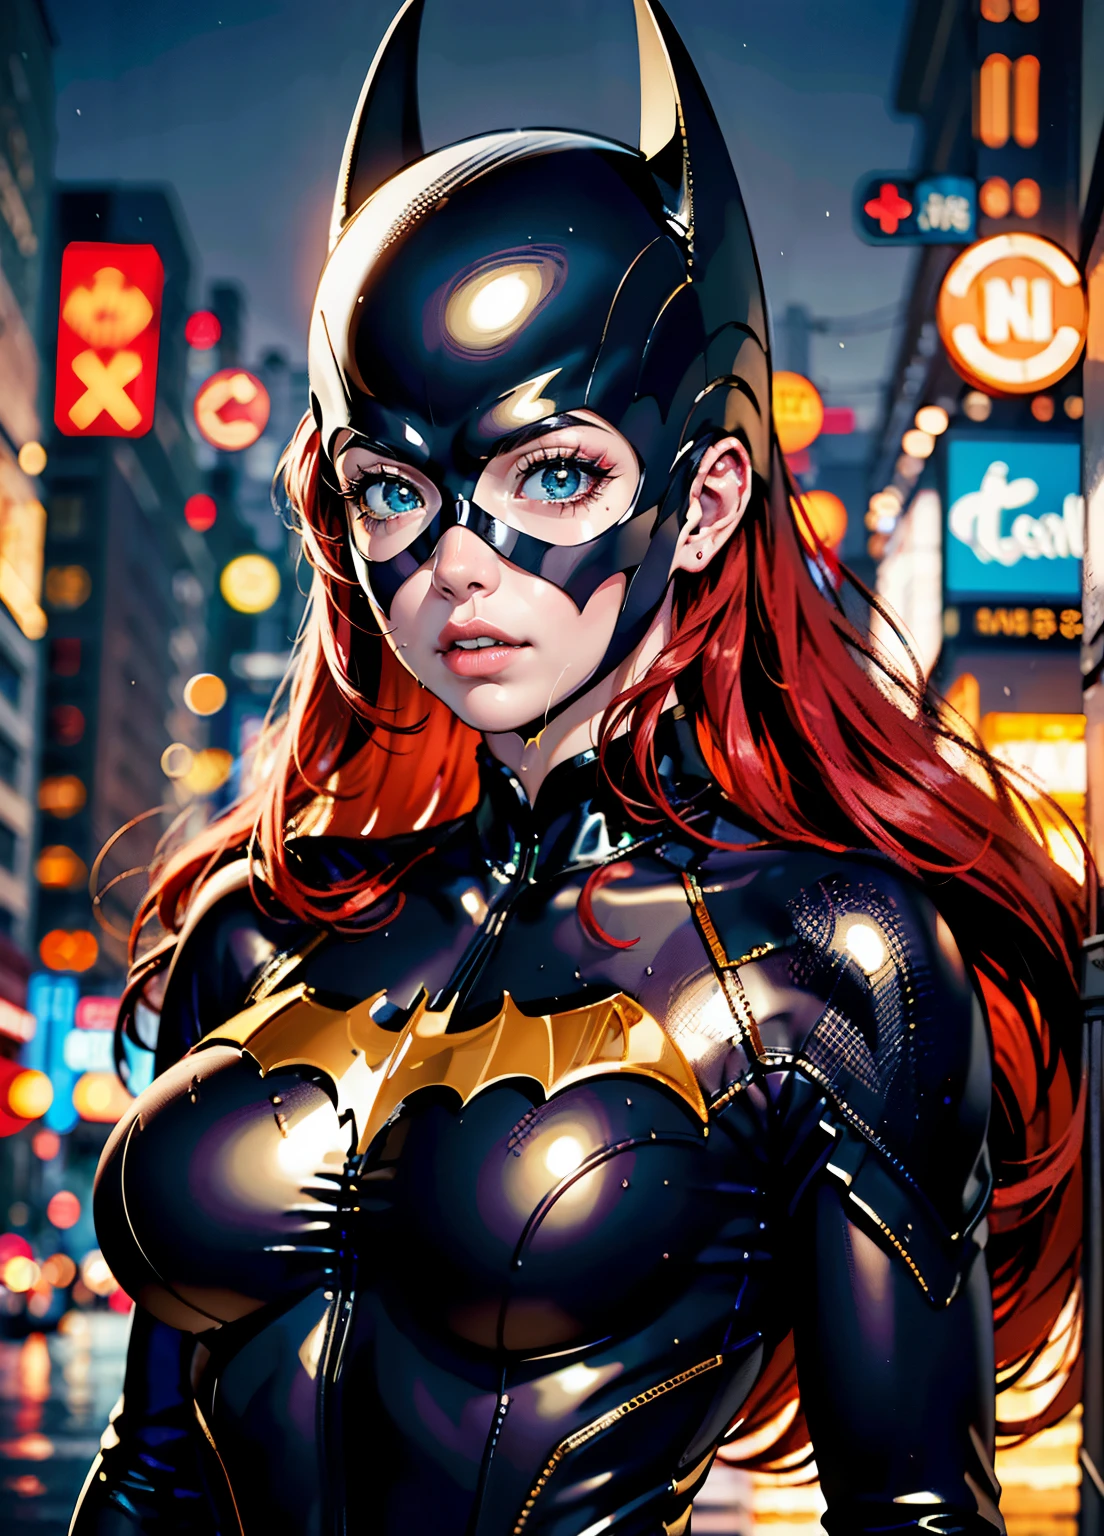 (masterpiece:1.2, best quality), current, (real picture, Complex details, depth of field), red haired woman, beauty, batgirl clothes, Batgirl cosplay, full body photo, prominent figure, In skyscrapers, night, photo (masterpiece) (best quality) (detail) (8k) (HD) (wallpaper) (Cinema lighting) (sharp focus) (Complex), sexly, rain, Wet, lightning, Wind-effect, best quality, ultra high resolution, photorealistic, full body portrait, Incredible beauty, big deal breasts, big deal , Biggest deal breasts, Big deal breasts, red face